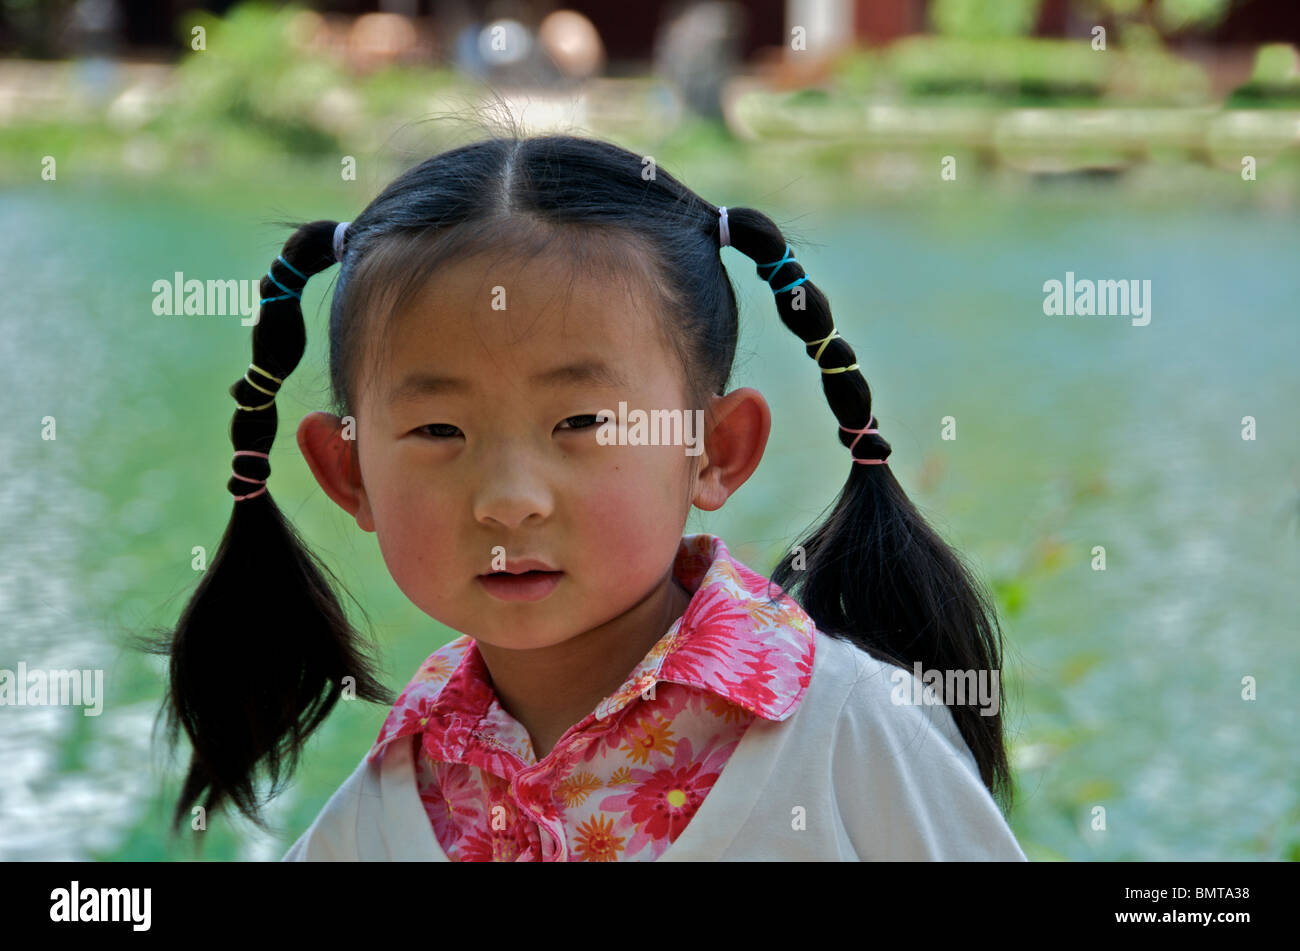 Portrait of five year old girl with pig tails Lijiang Yunnan China Stock Photo